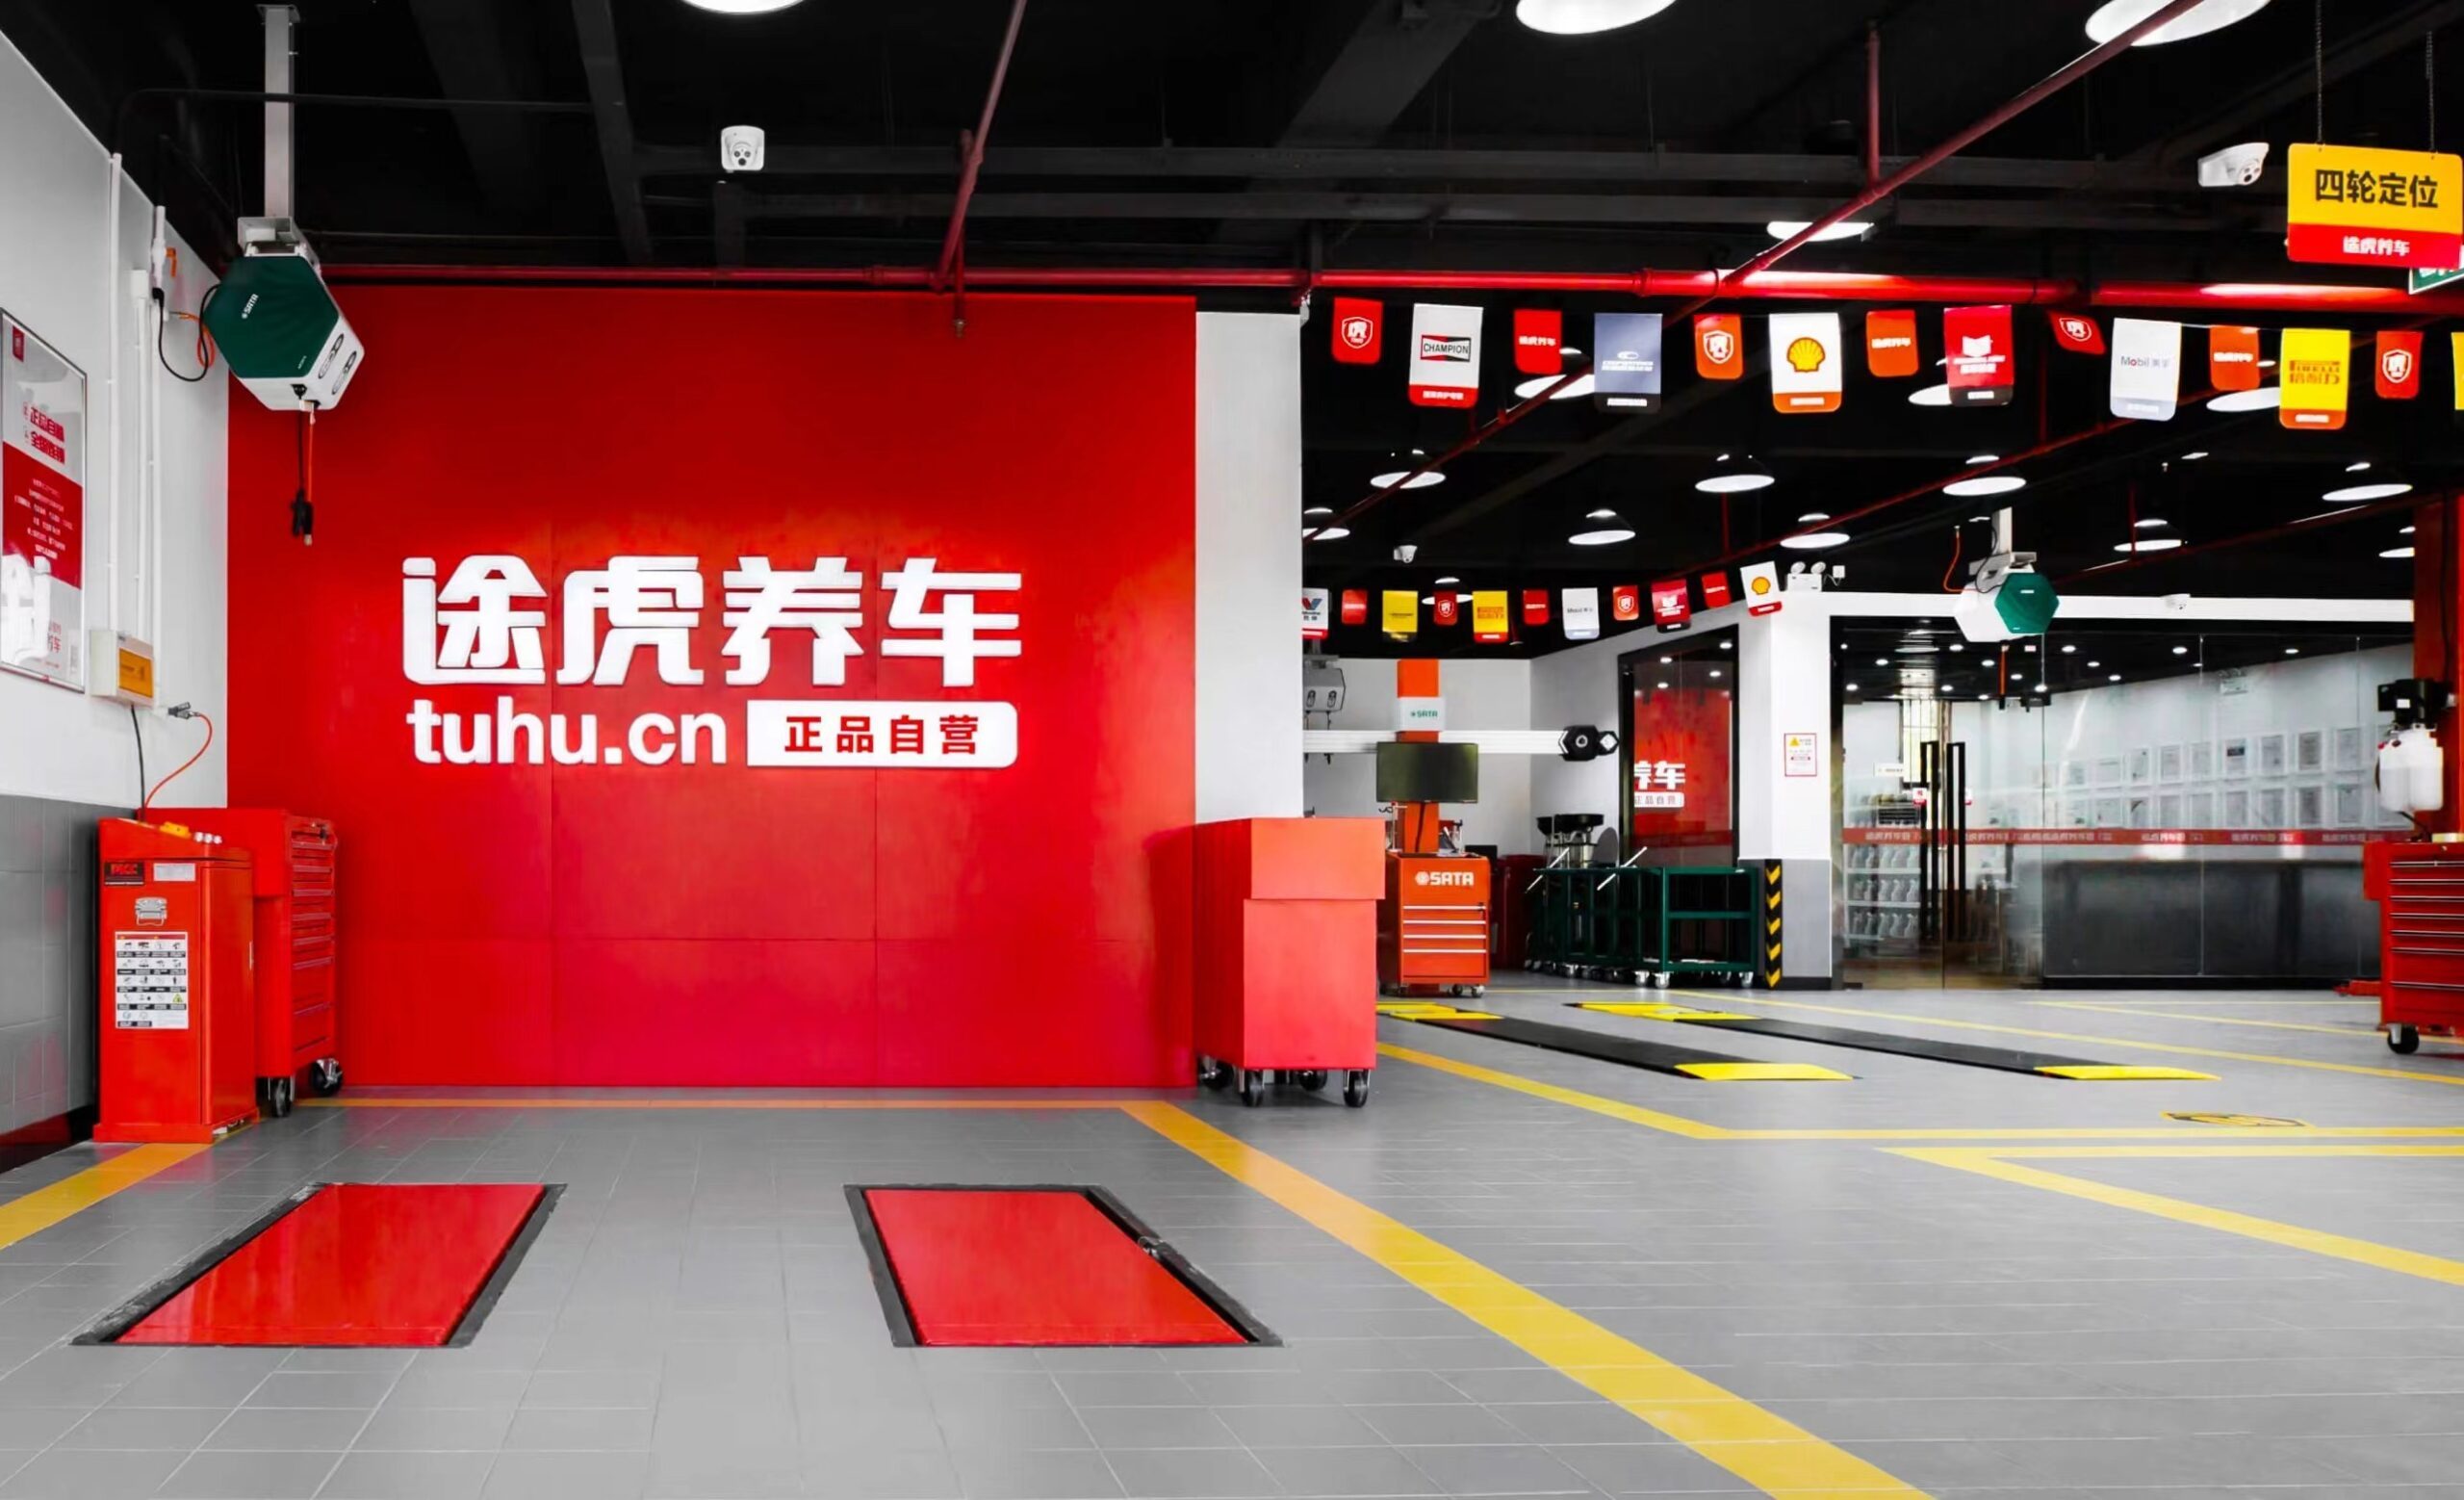 China's Tuhu Car shares notch modest gains from issue price in HK debut